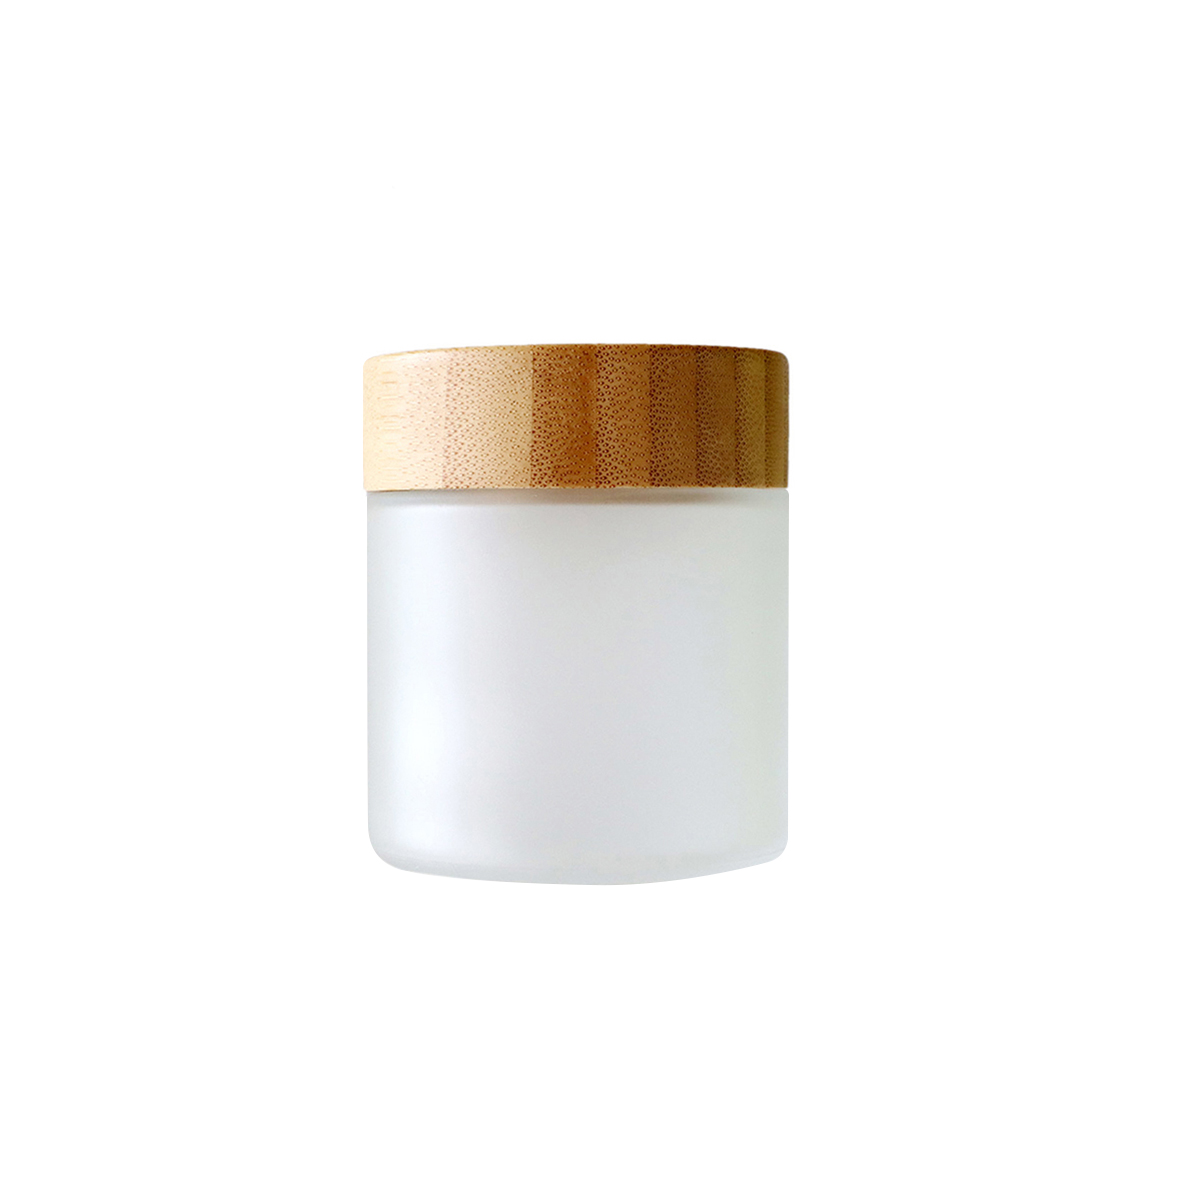 4oz frosted glass cosmetic cream jar with bamboo lid